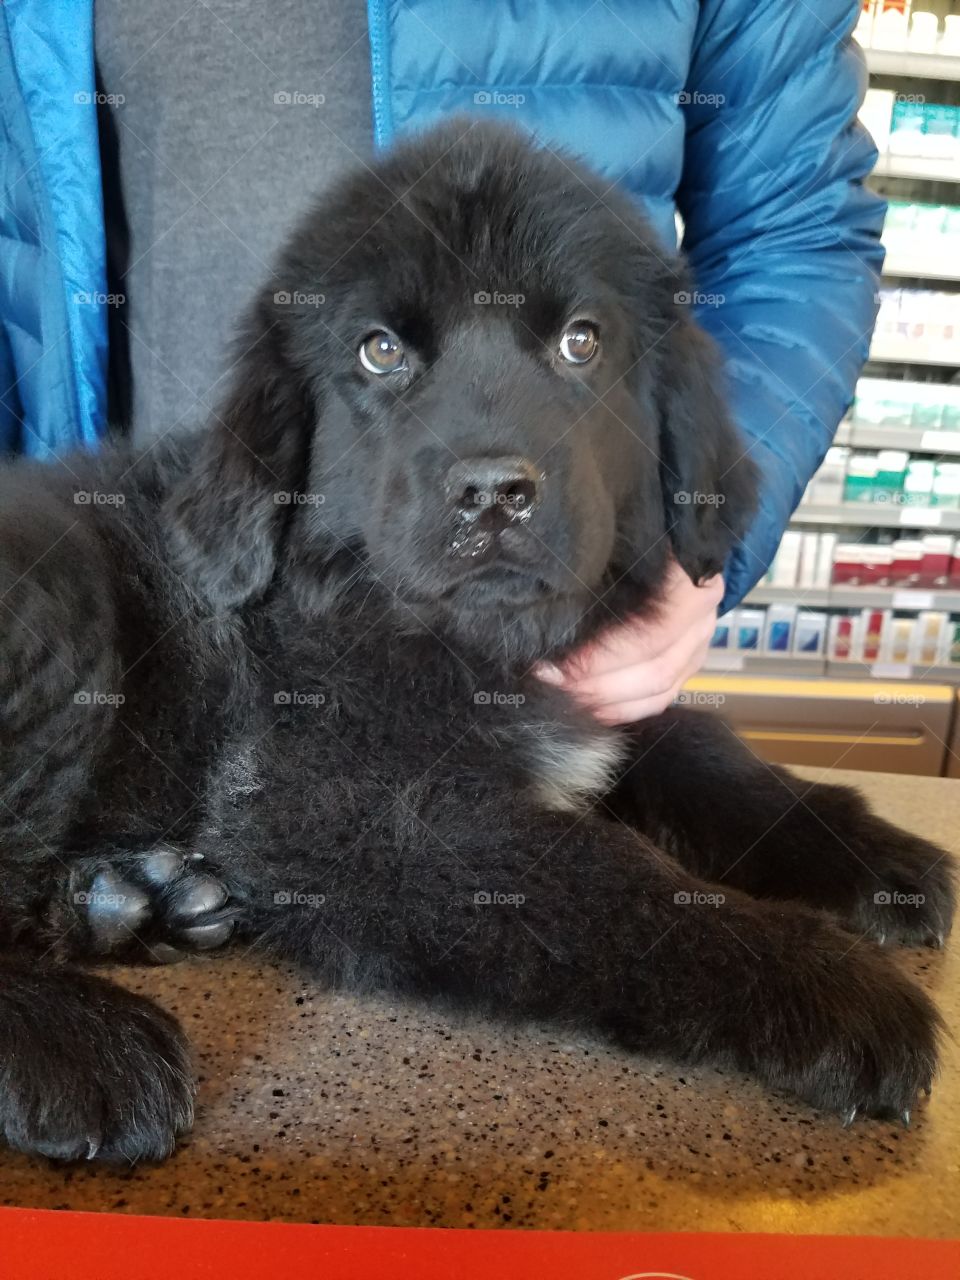 Baby animals couldn't be any cuter Tham this 11 week old Newfoundland puppy